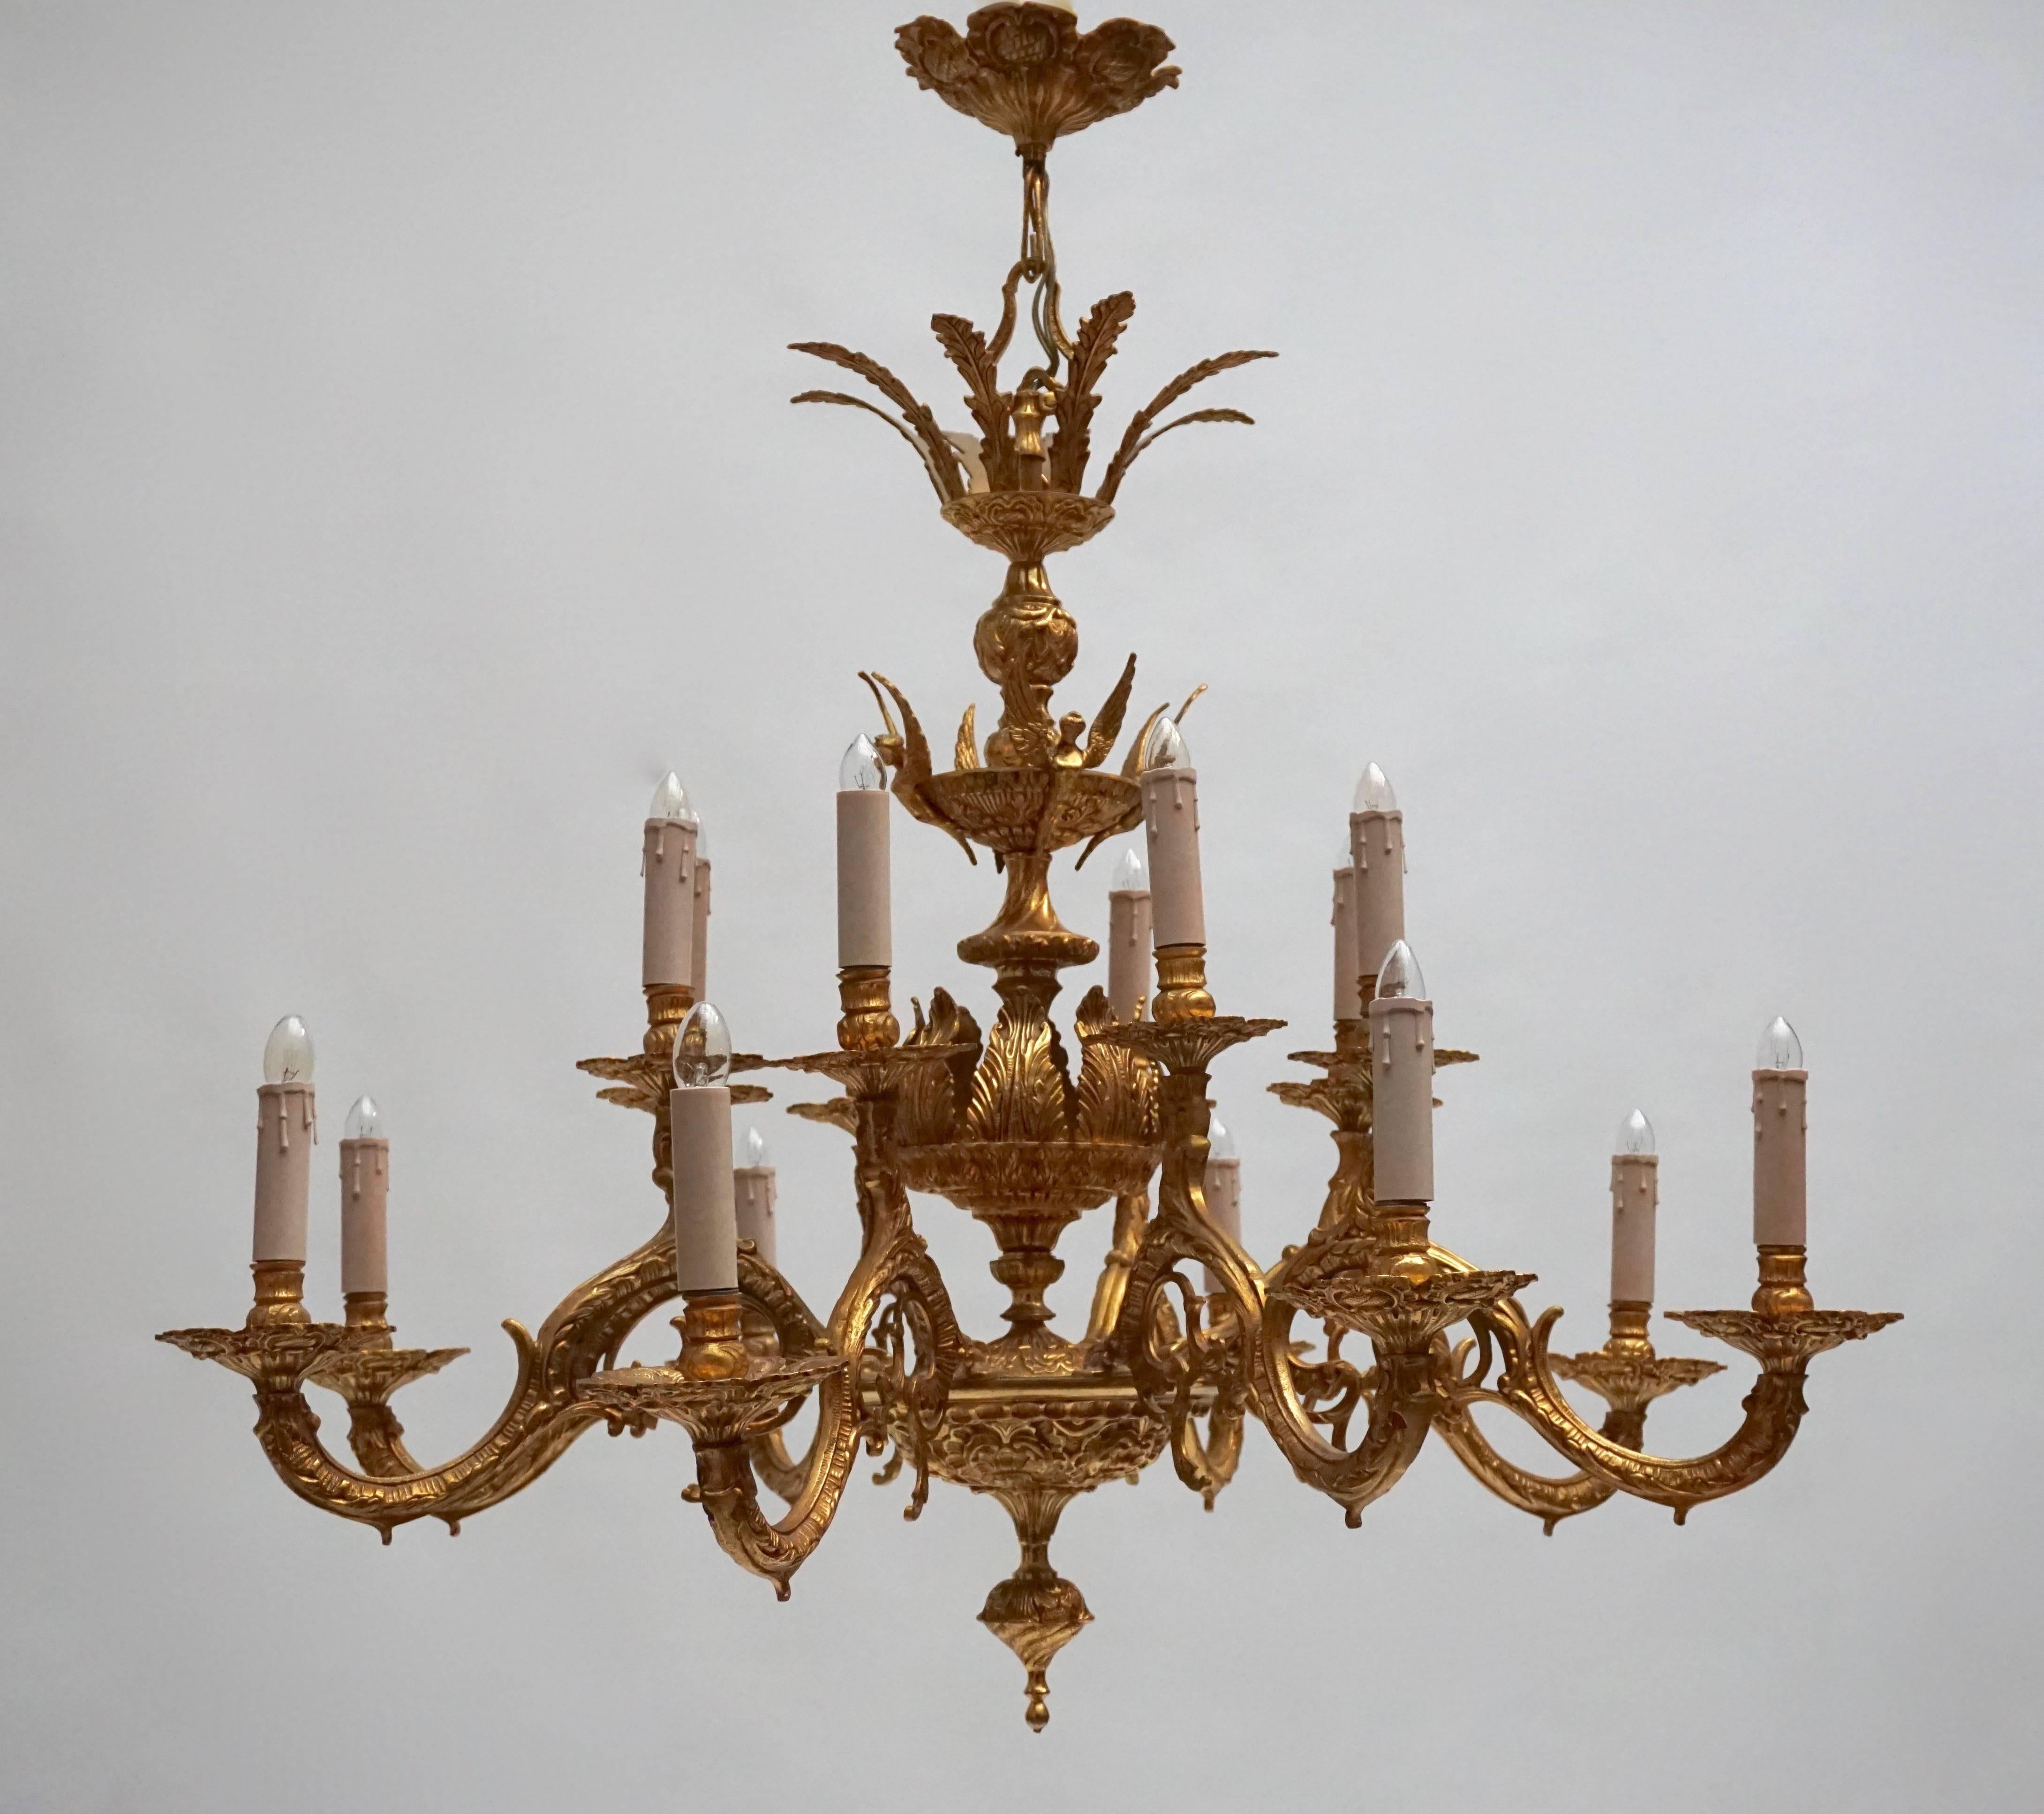 A lovely large Italian sixteen arms gilt metal chandelier.

Measures: Diameter 90 cm.
Height 90 cm.
The light requires sixteen single E14 screw fit lightbulbs (60Watt max.) LED compatible.
 